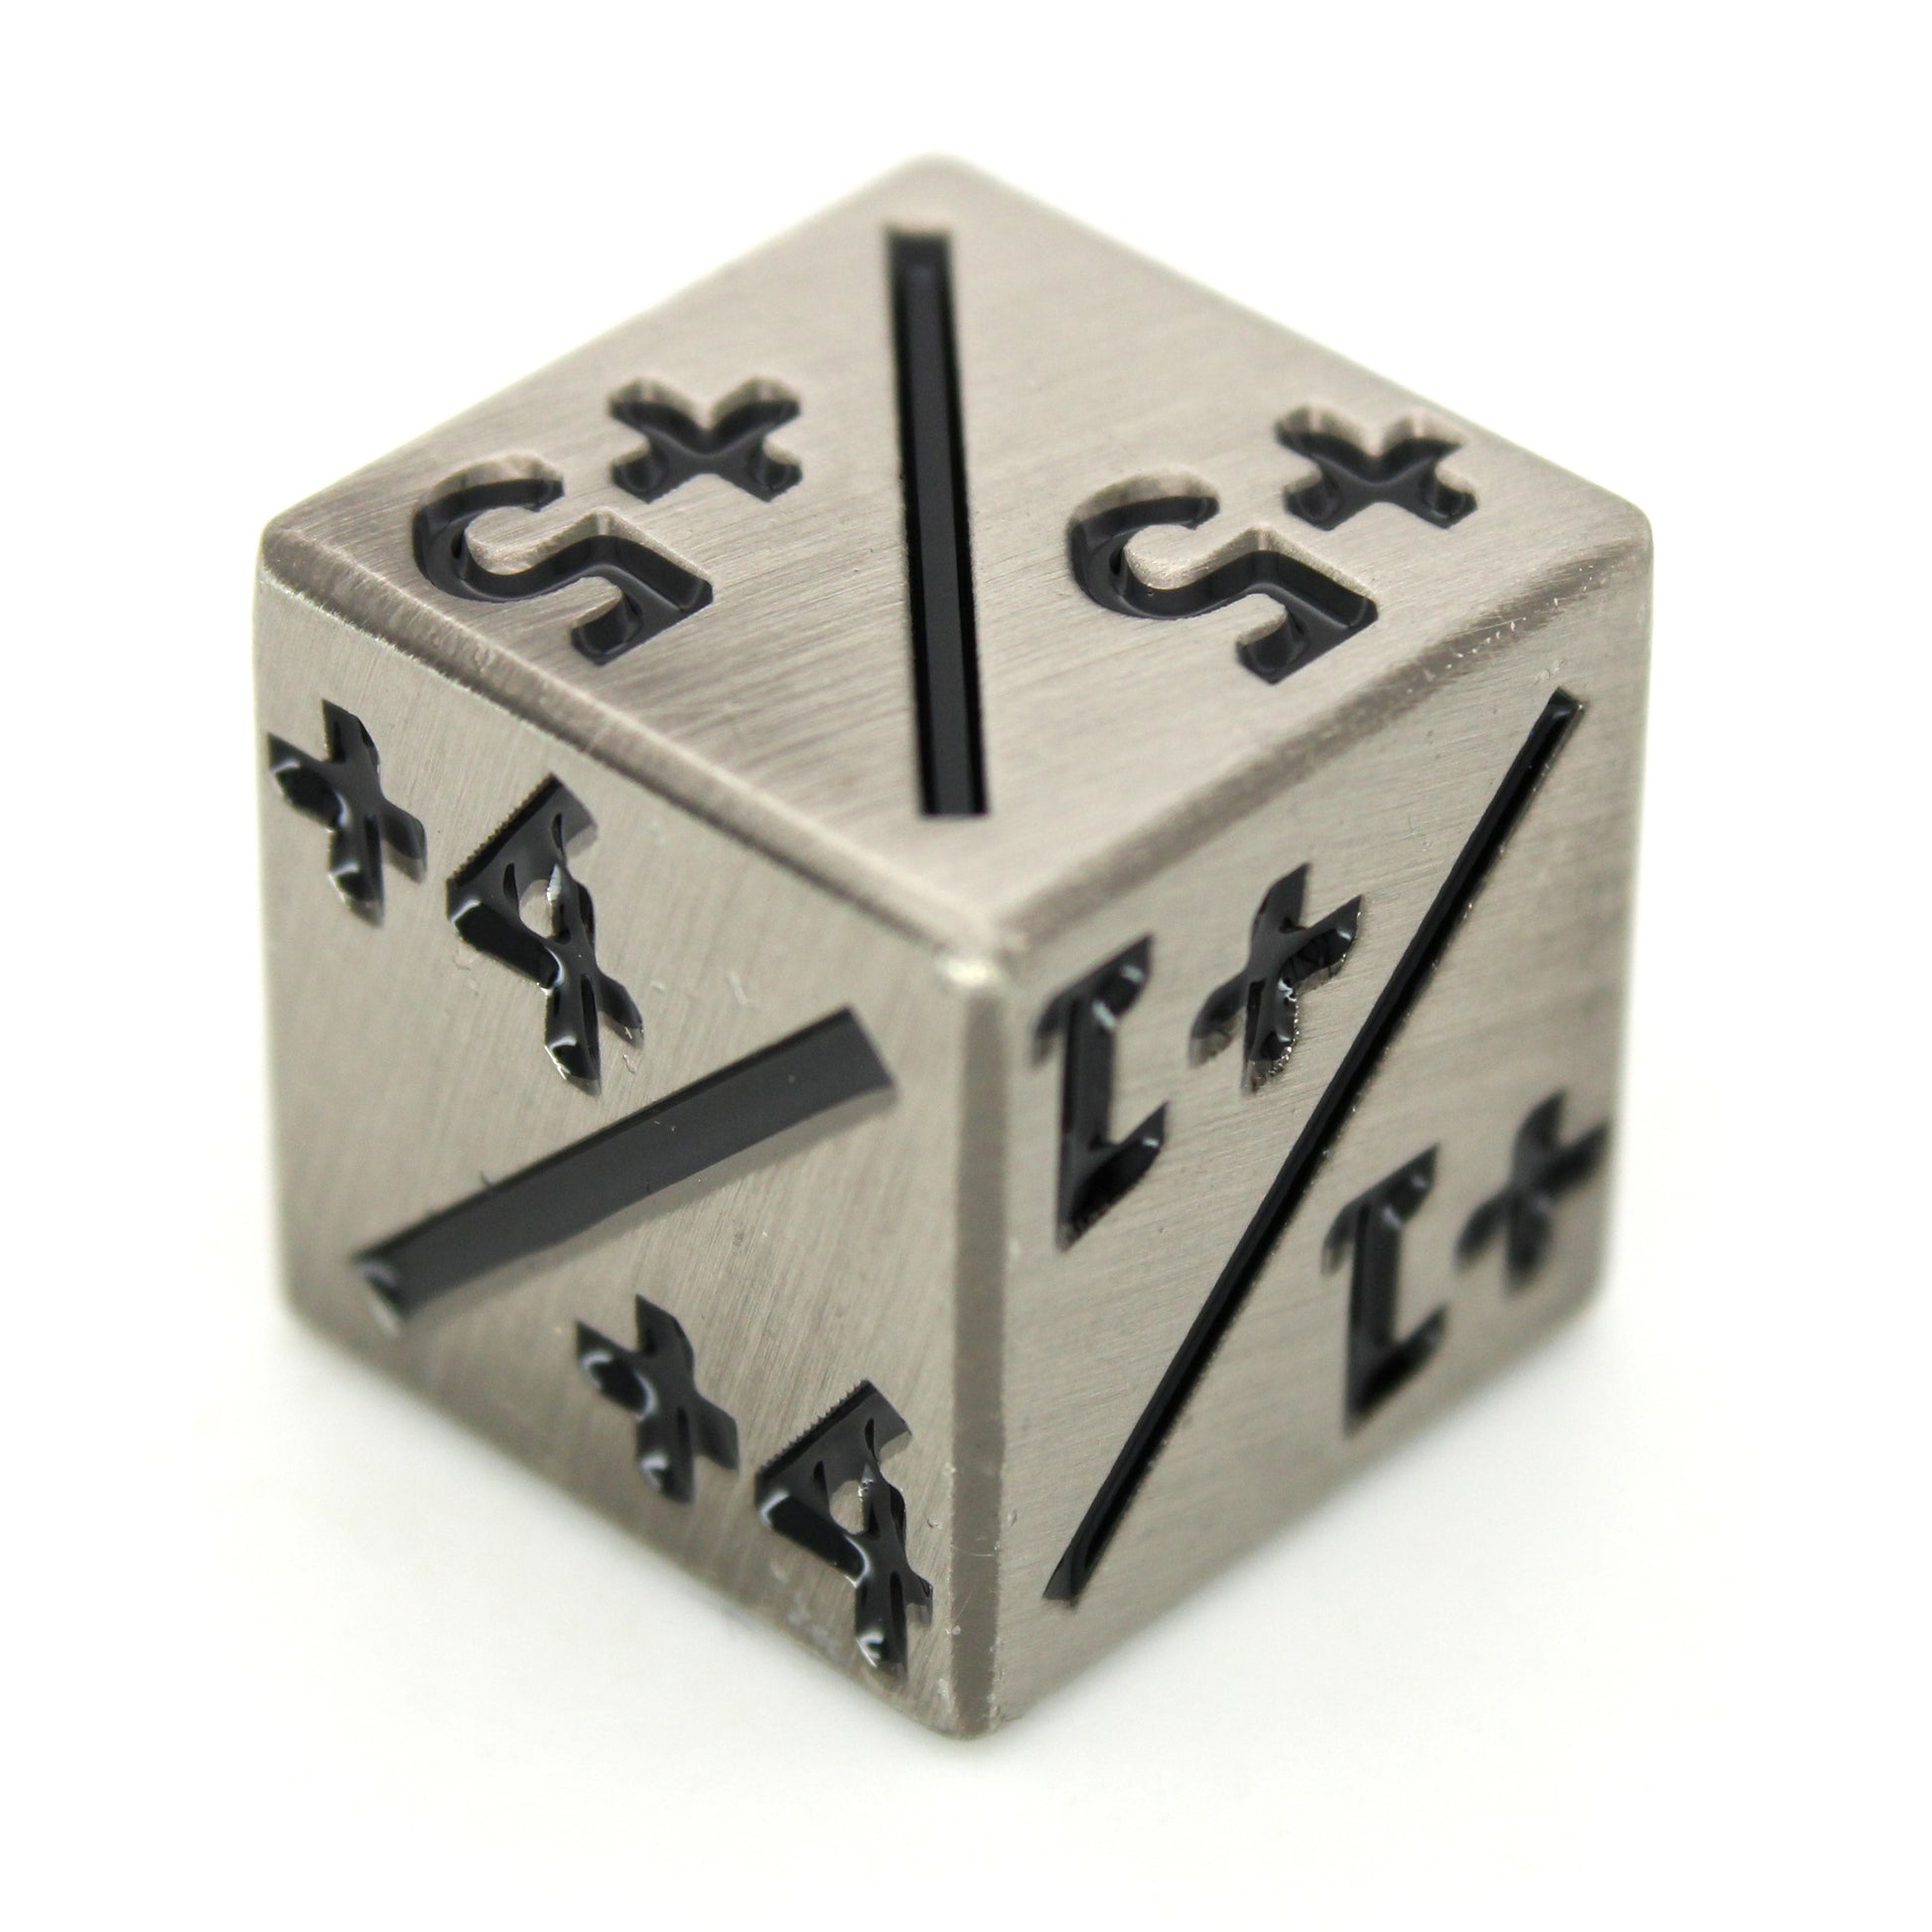 Magic Counters are individual shiny, silver six-sided +1/+1 through +6/+6 dice for use with Magic the Gathering.